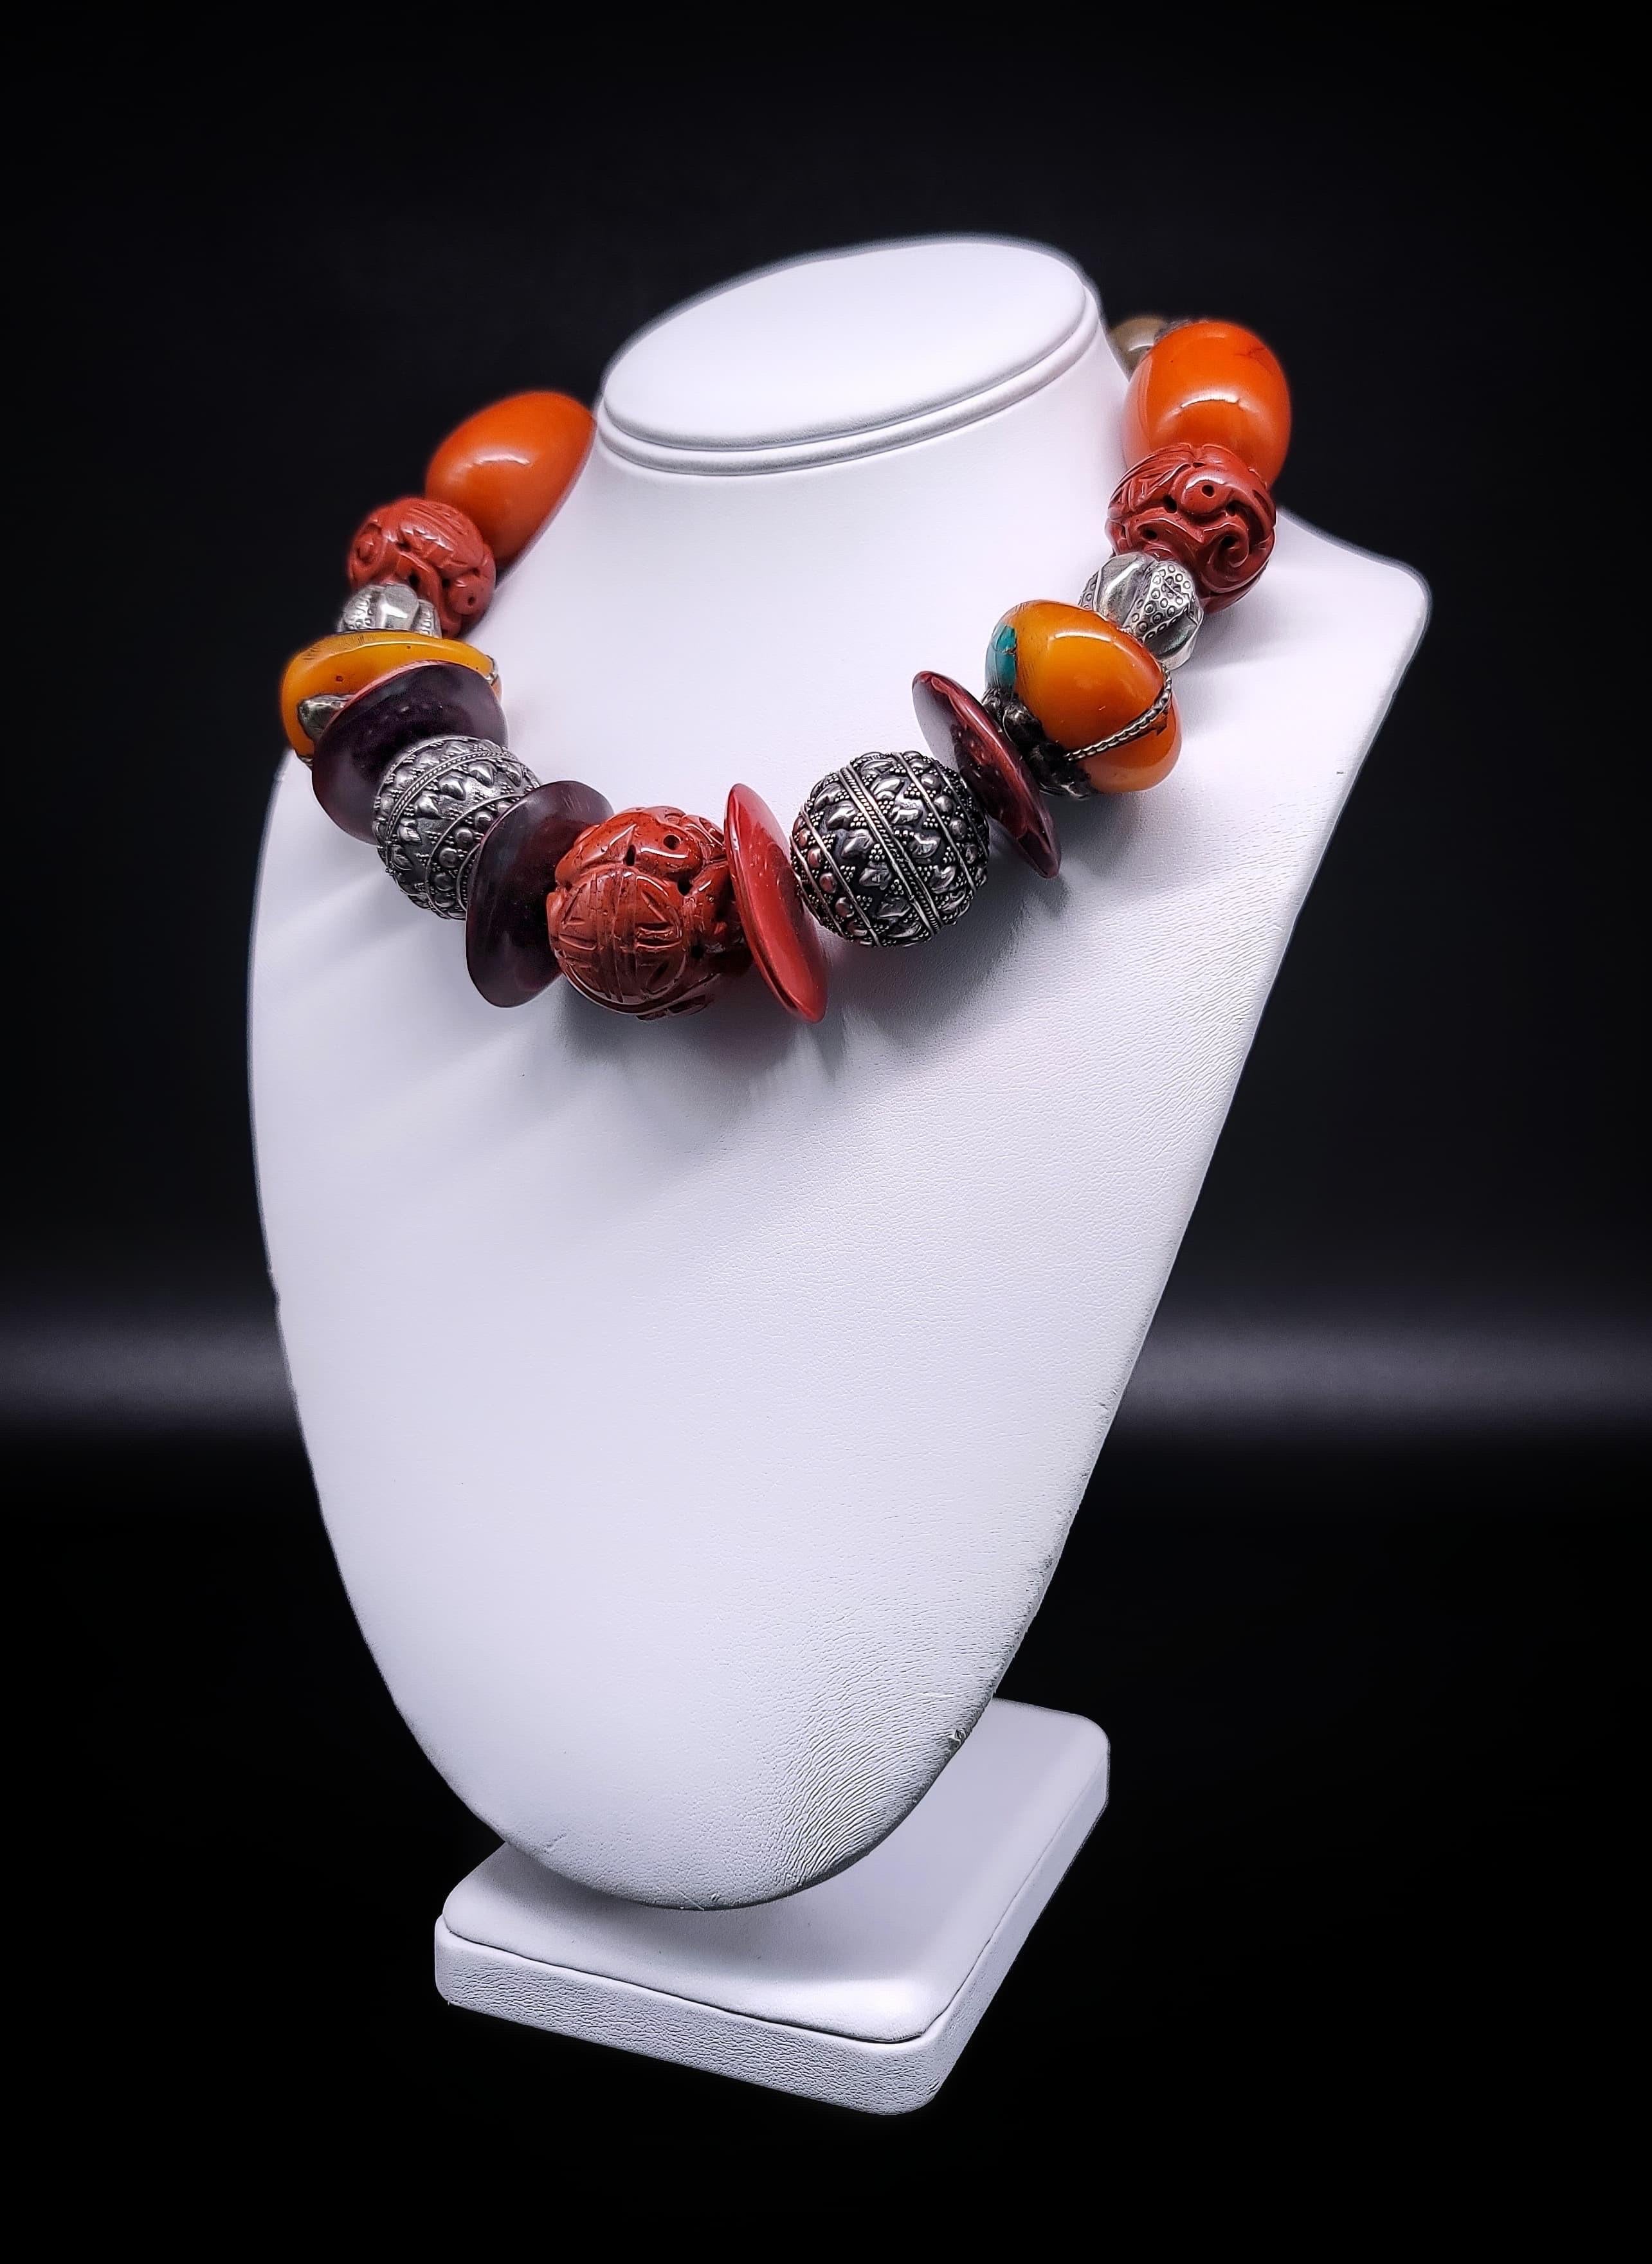 Elevate your jewelry collection with a truly exceptional piece, unlike any other. Behold a one-of-a-kind necklace that marries artistry, tradition, and elegance in a harmonious union of materials and craftsmanship.
Carved Ceramic: At its heart, this